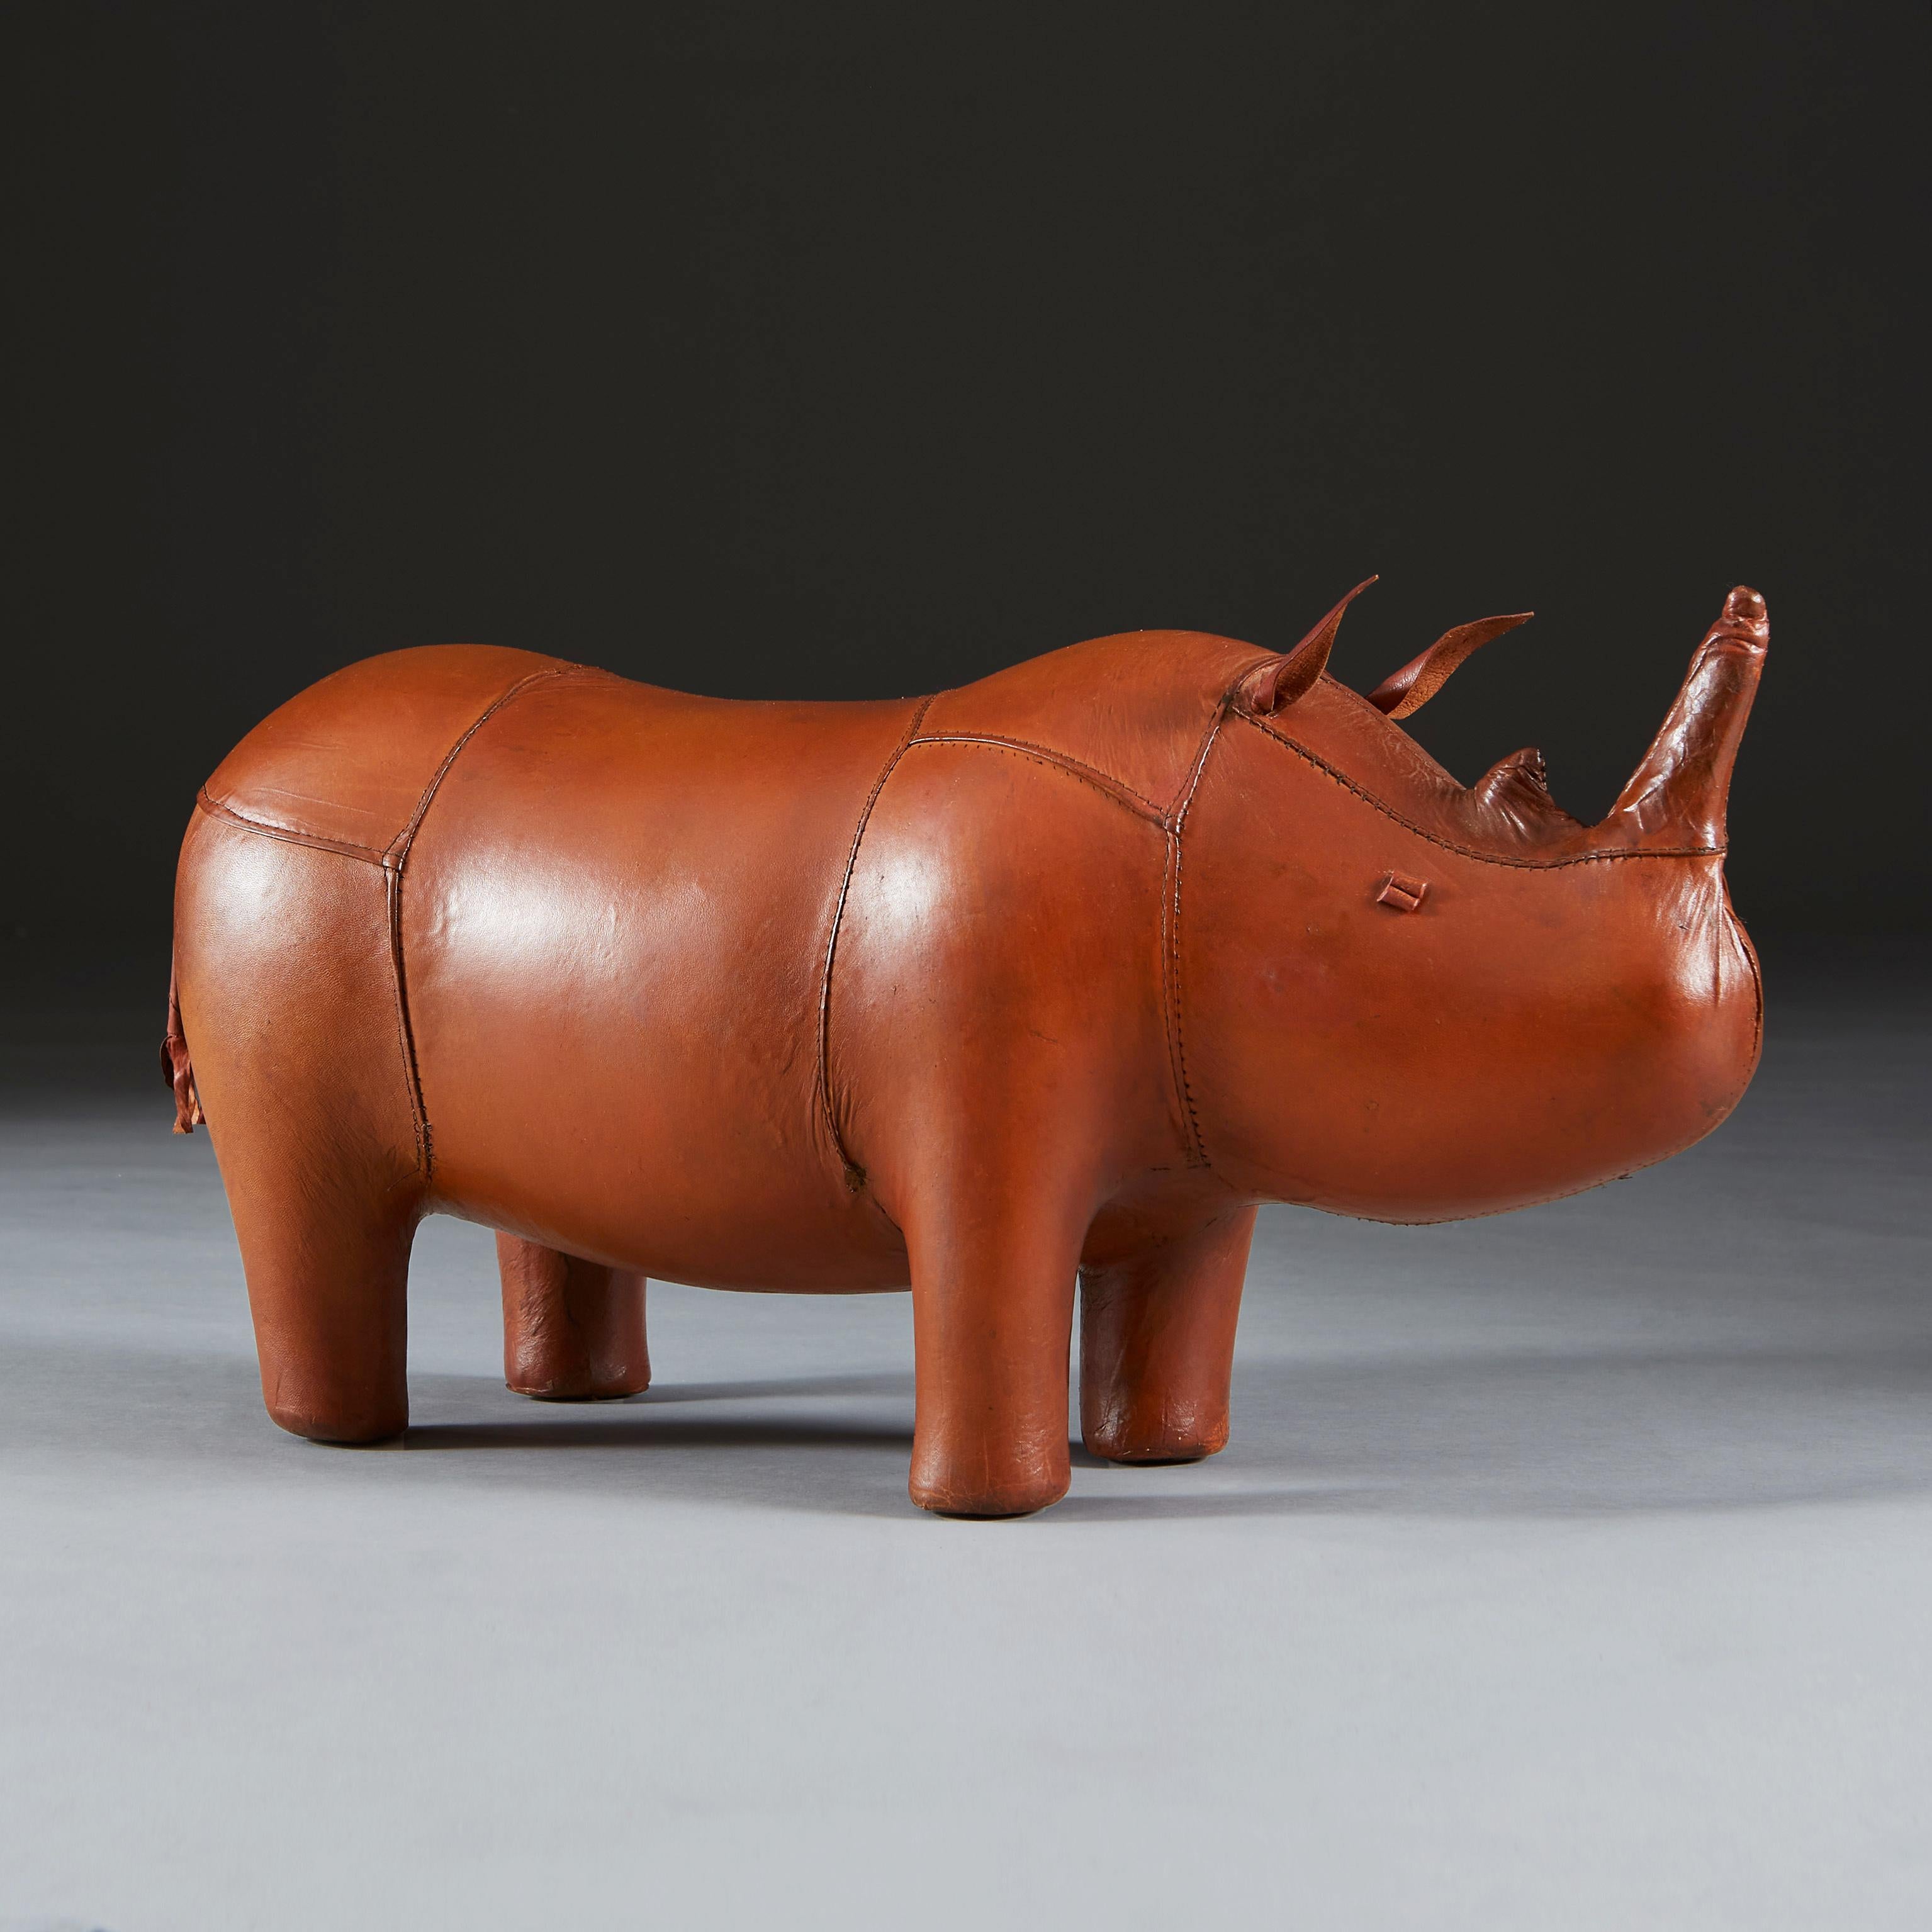 A leather rhinoceros foot stool with stitched leather panels and button eyes, by Dmitri Omersa for Liberty, London.